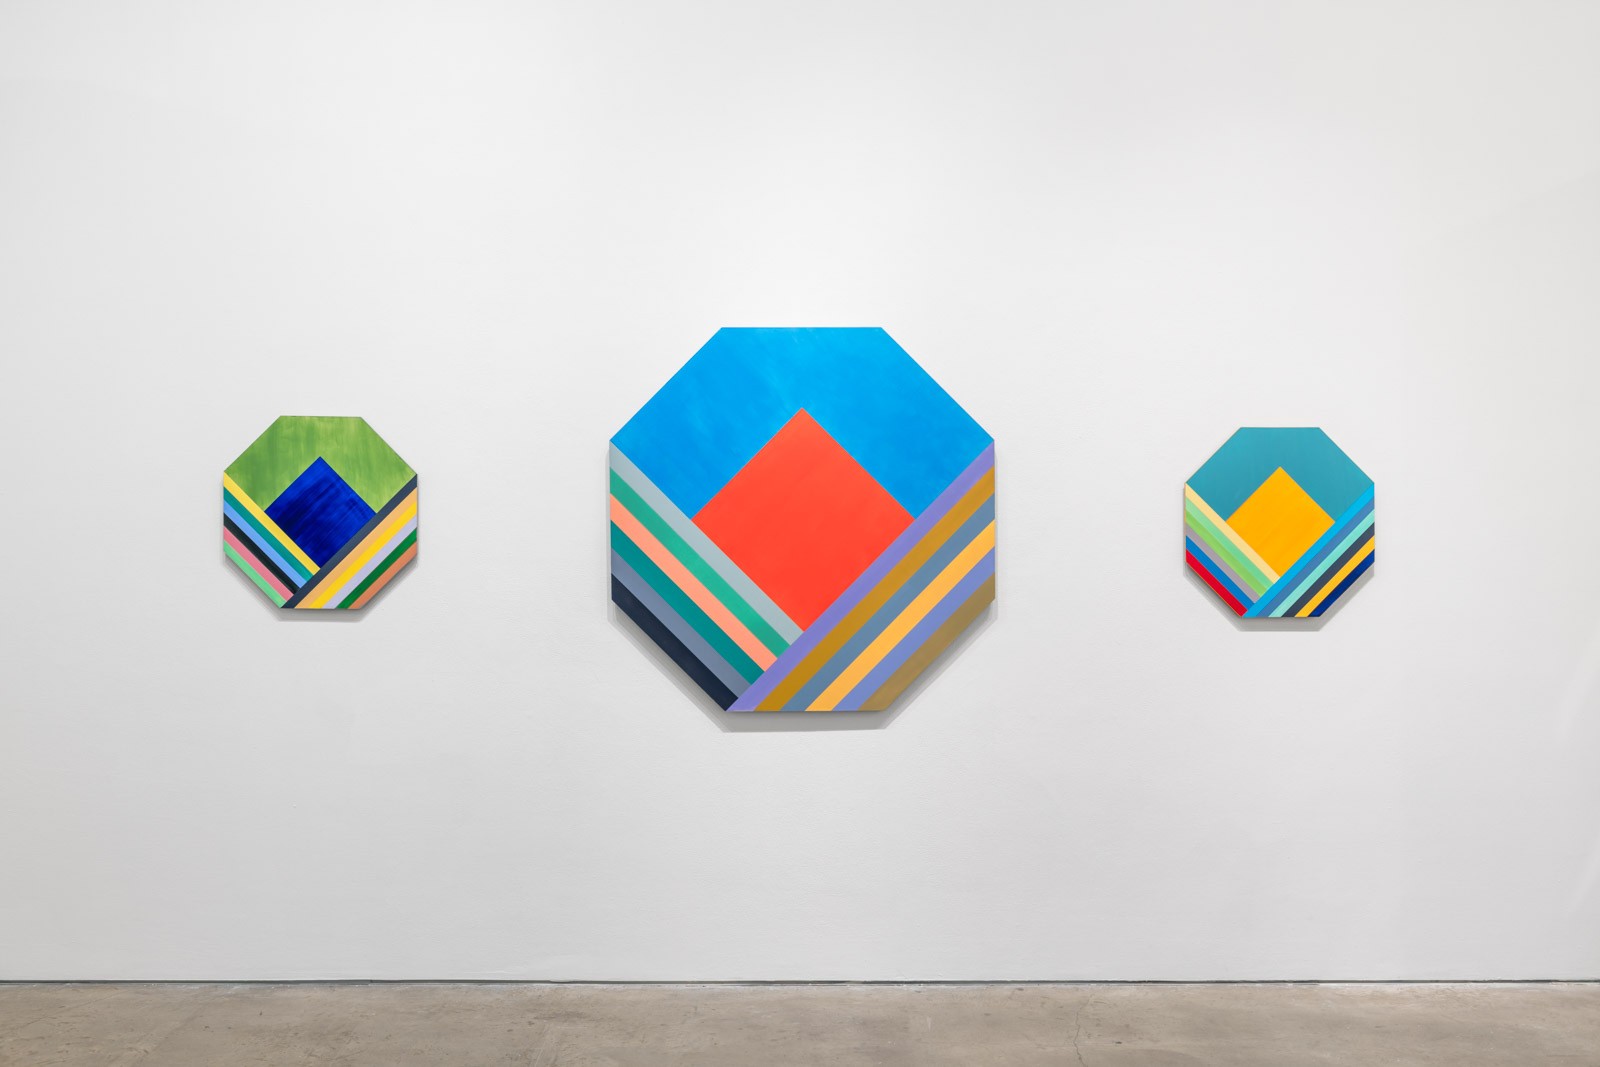 Installation view of 'ORRA' paintings